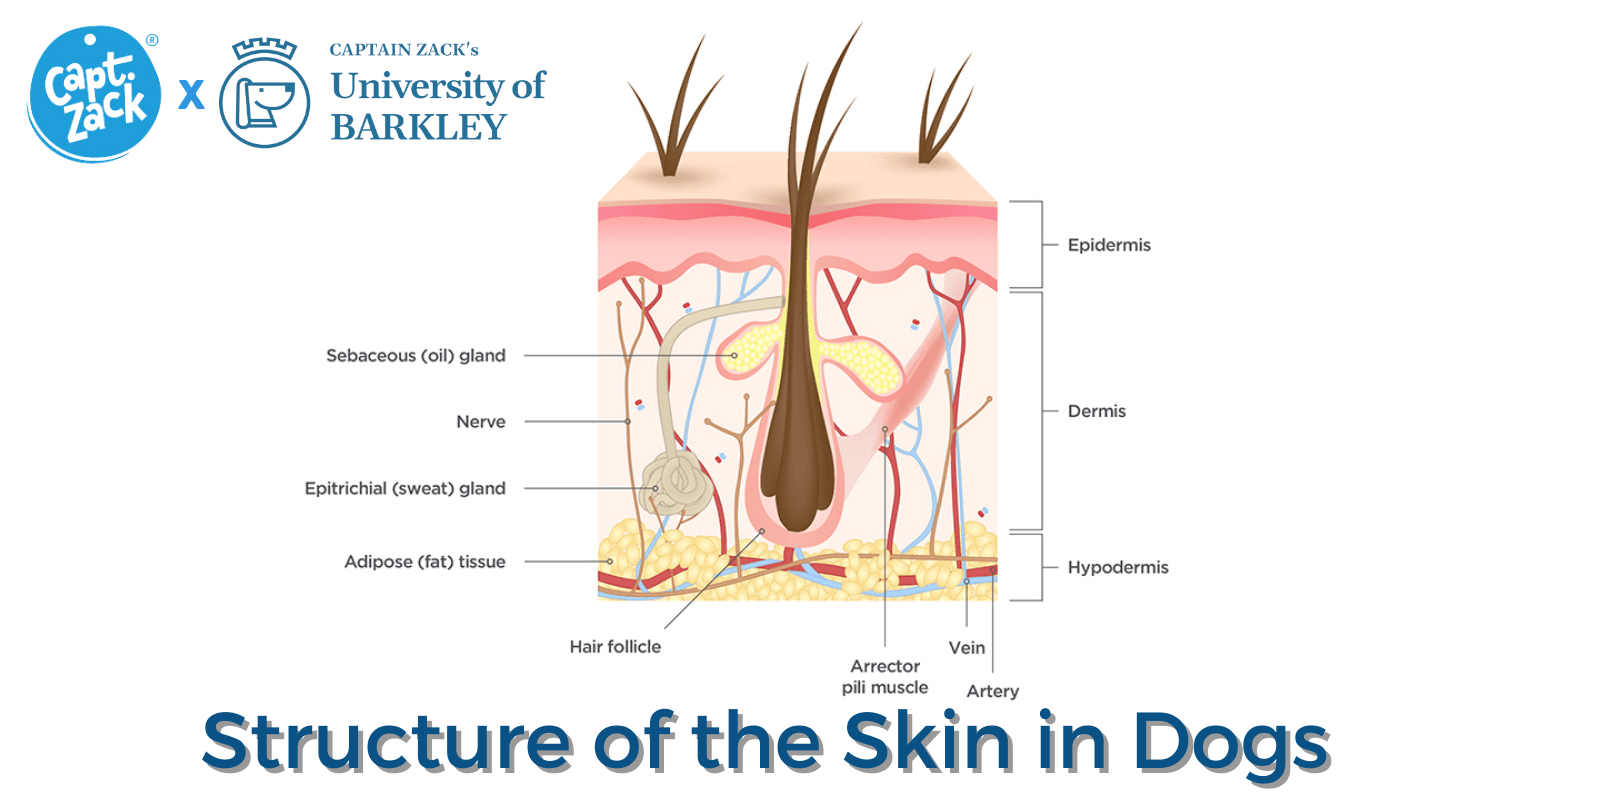 Structure of the Skin in Dogs - Captain Zack